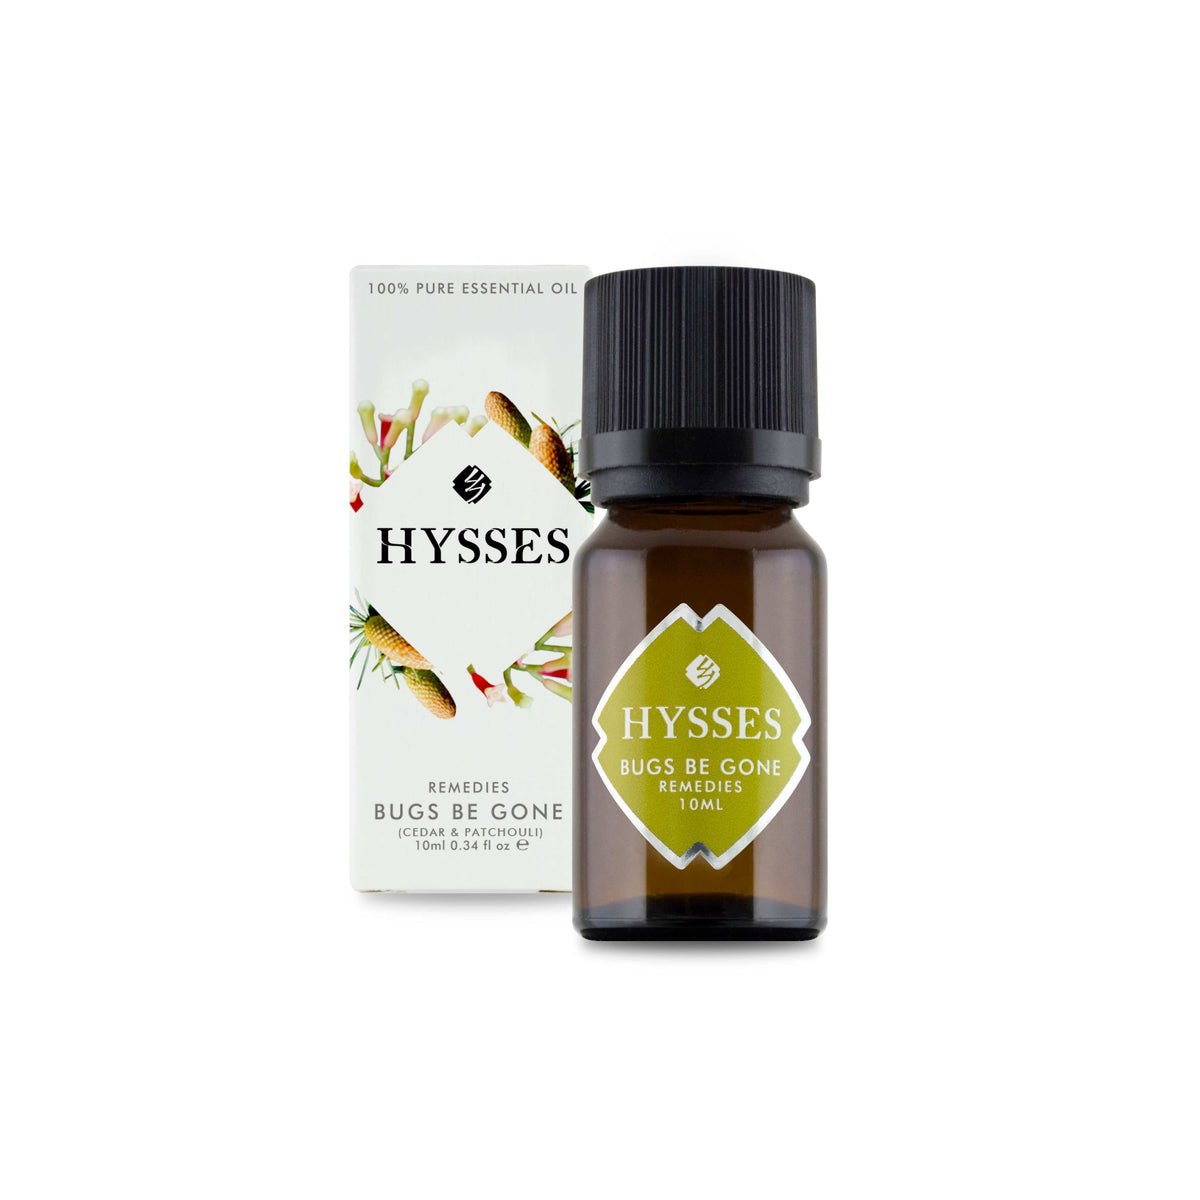 Hysses Essential Oil 10ml Remedies, Bugs Be Gone